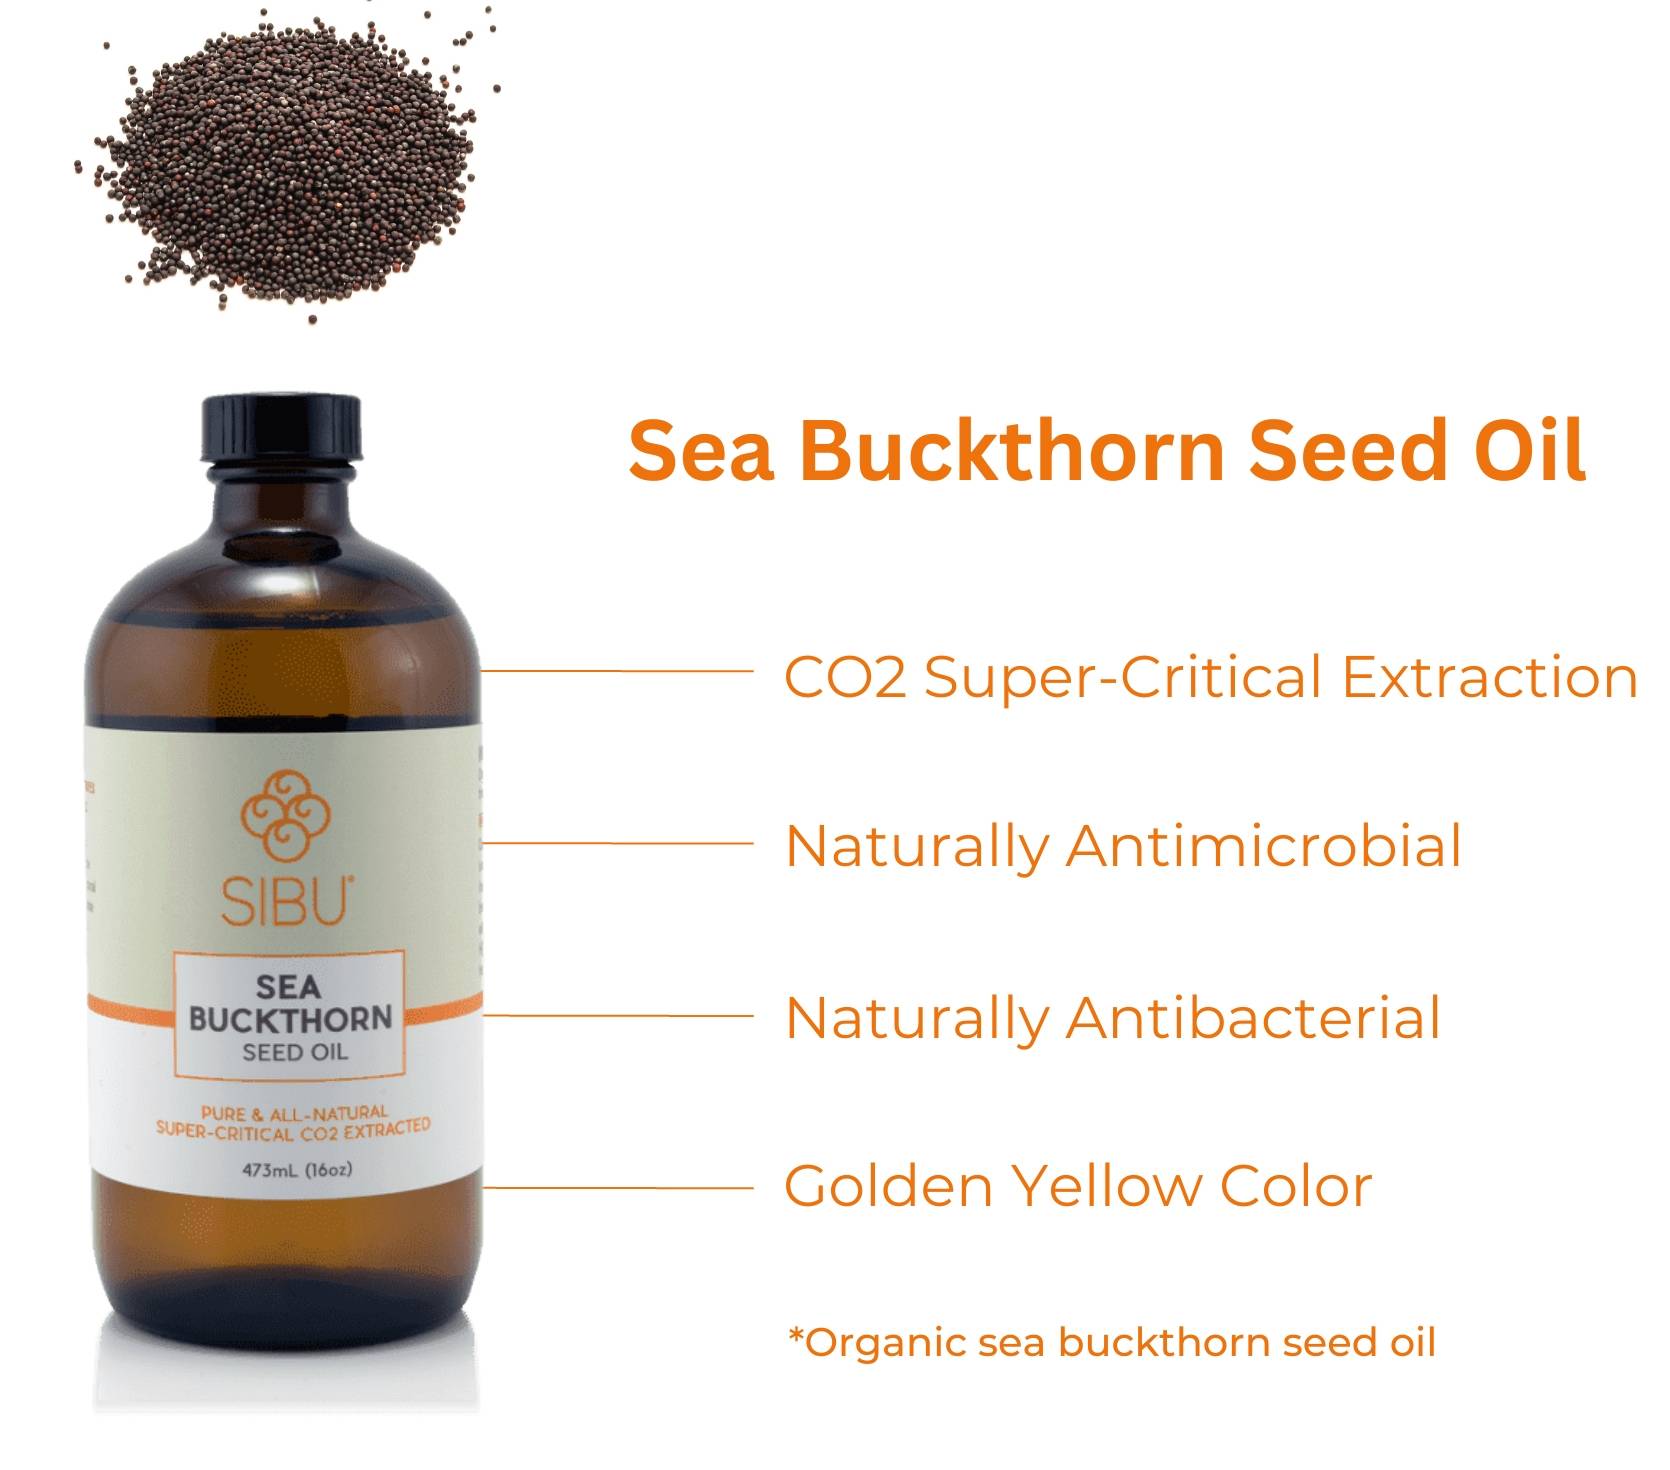 Sea Buckthorn Seed Oil - Pure & All-Natural, Super-Critical CO2 Extracted